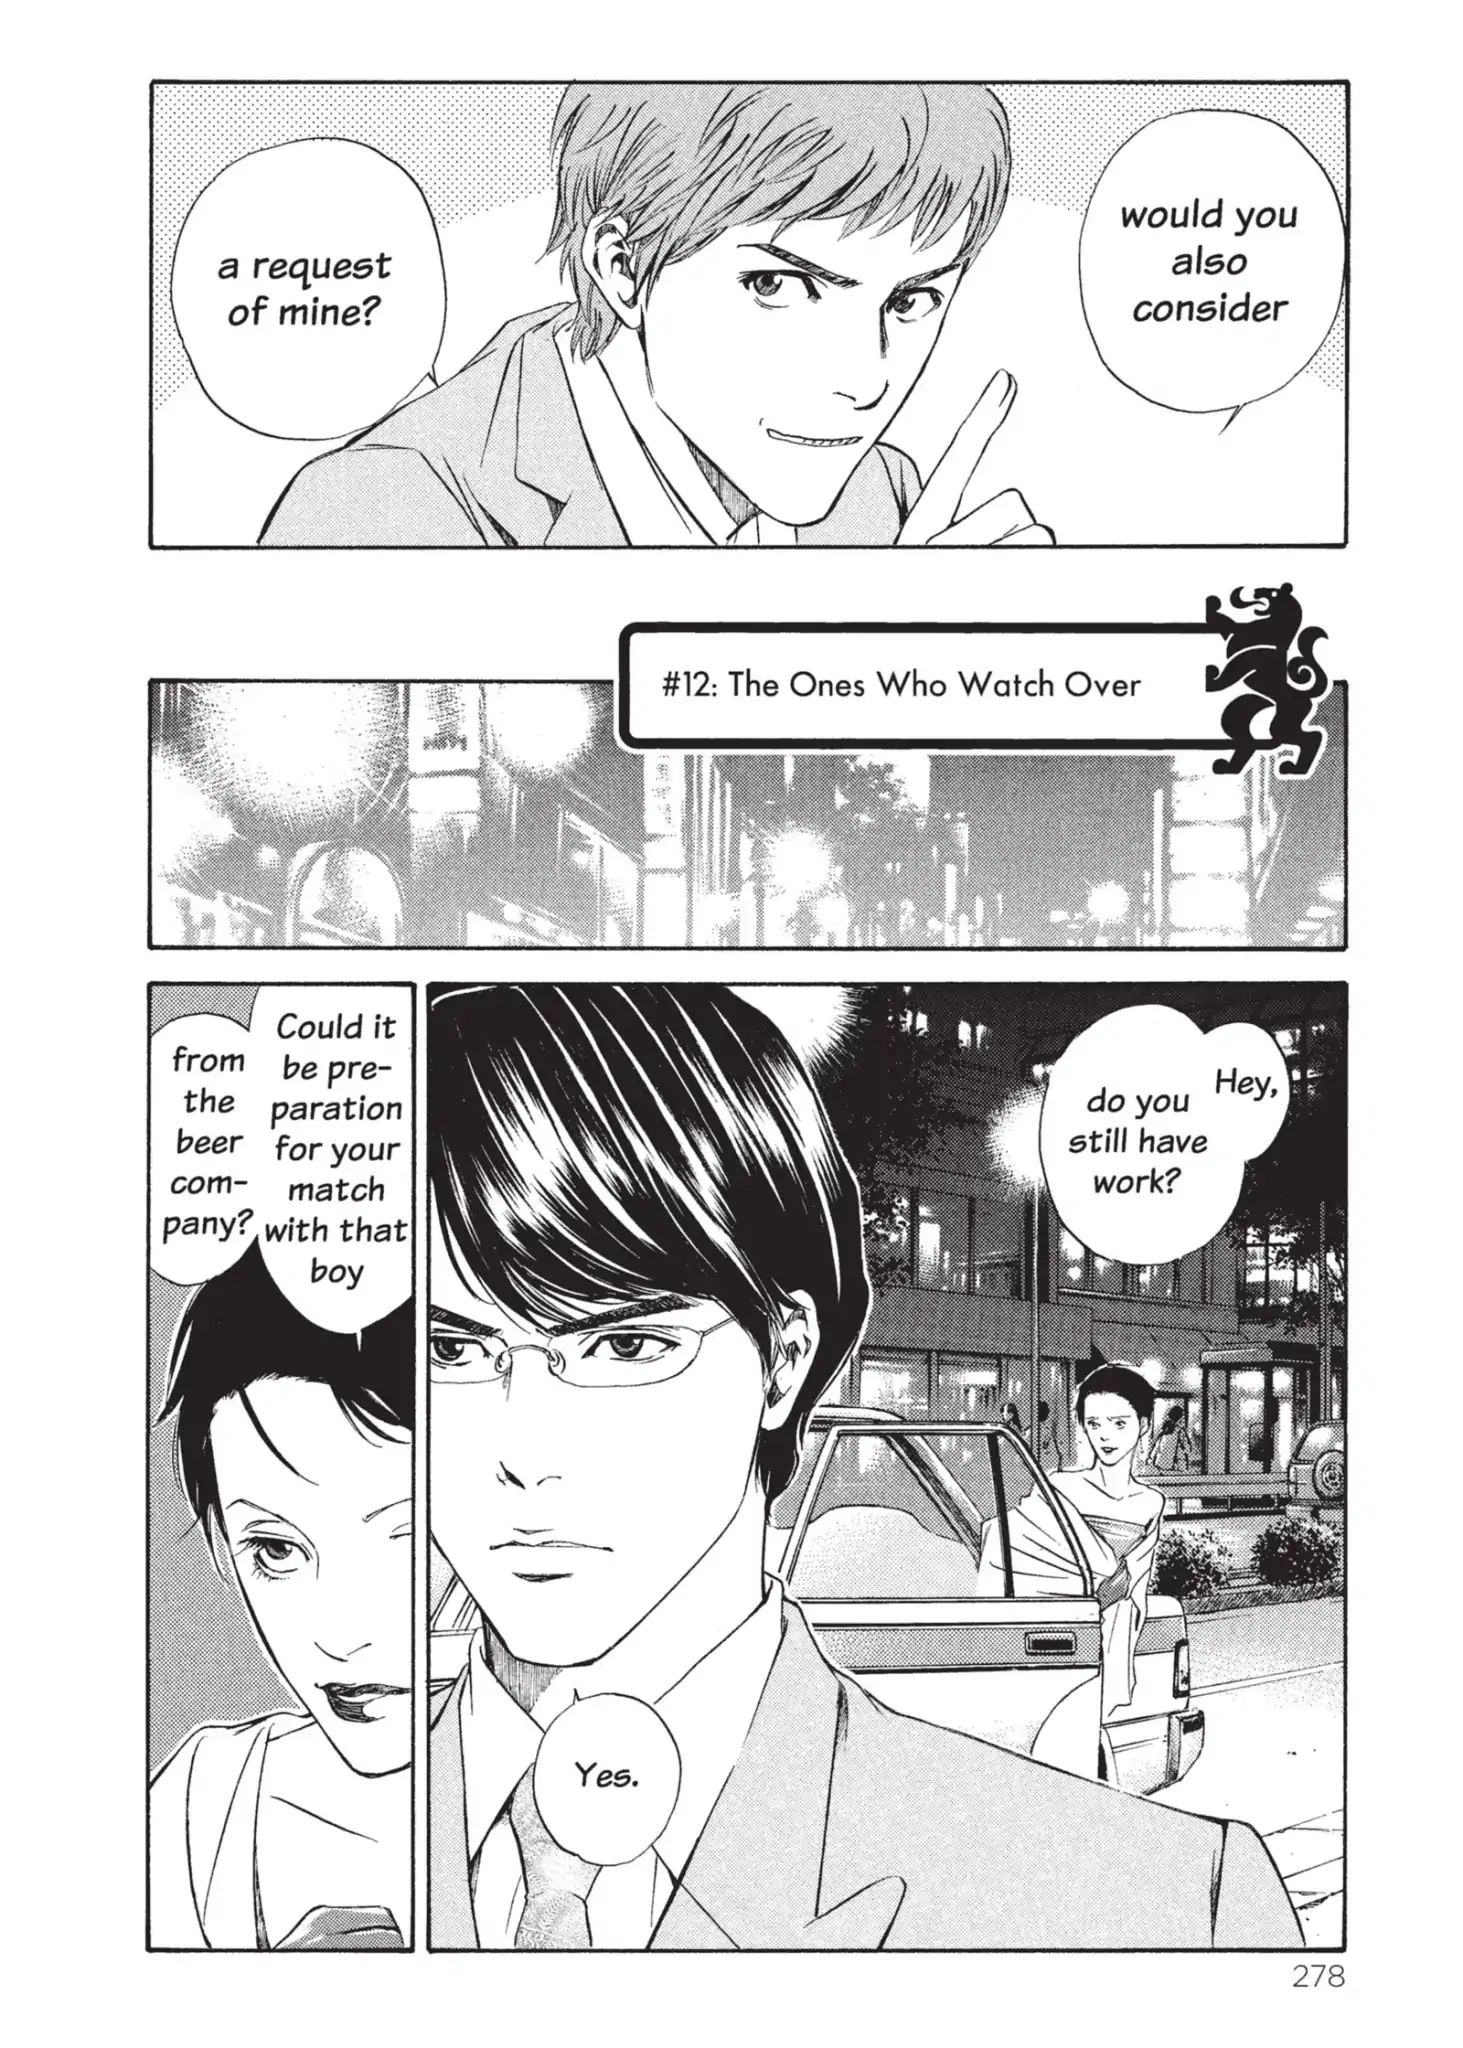 Kami No Shizuku Vol.1 Chapter 12: The Ones Who Watch Over - Picture 2